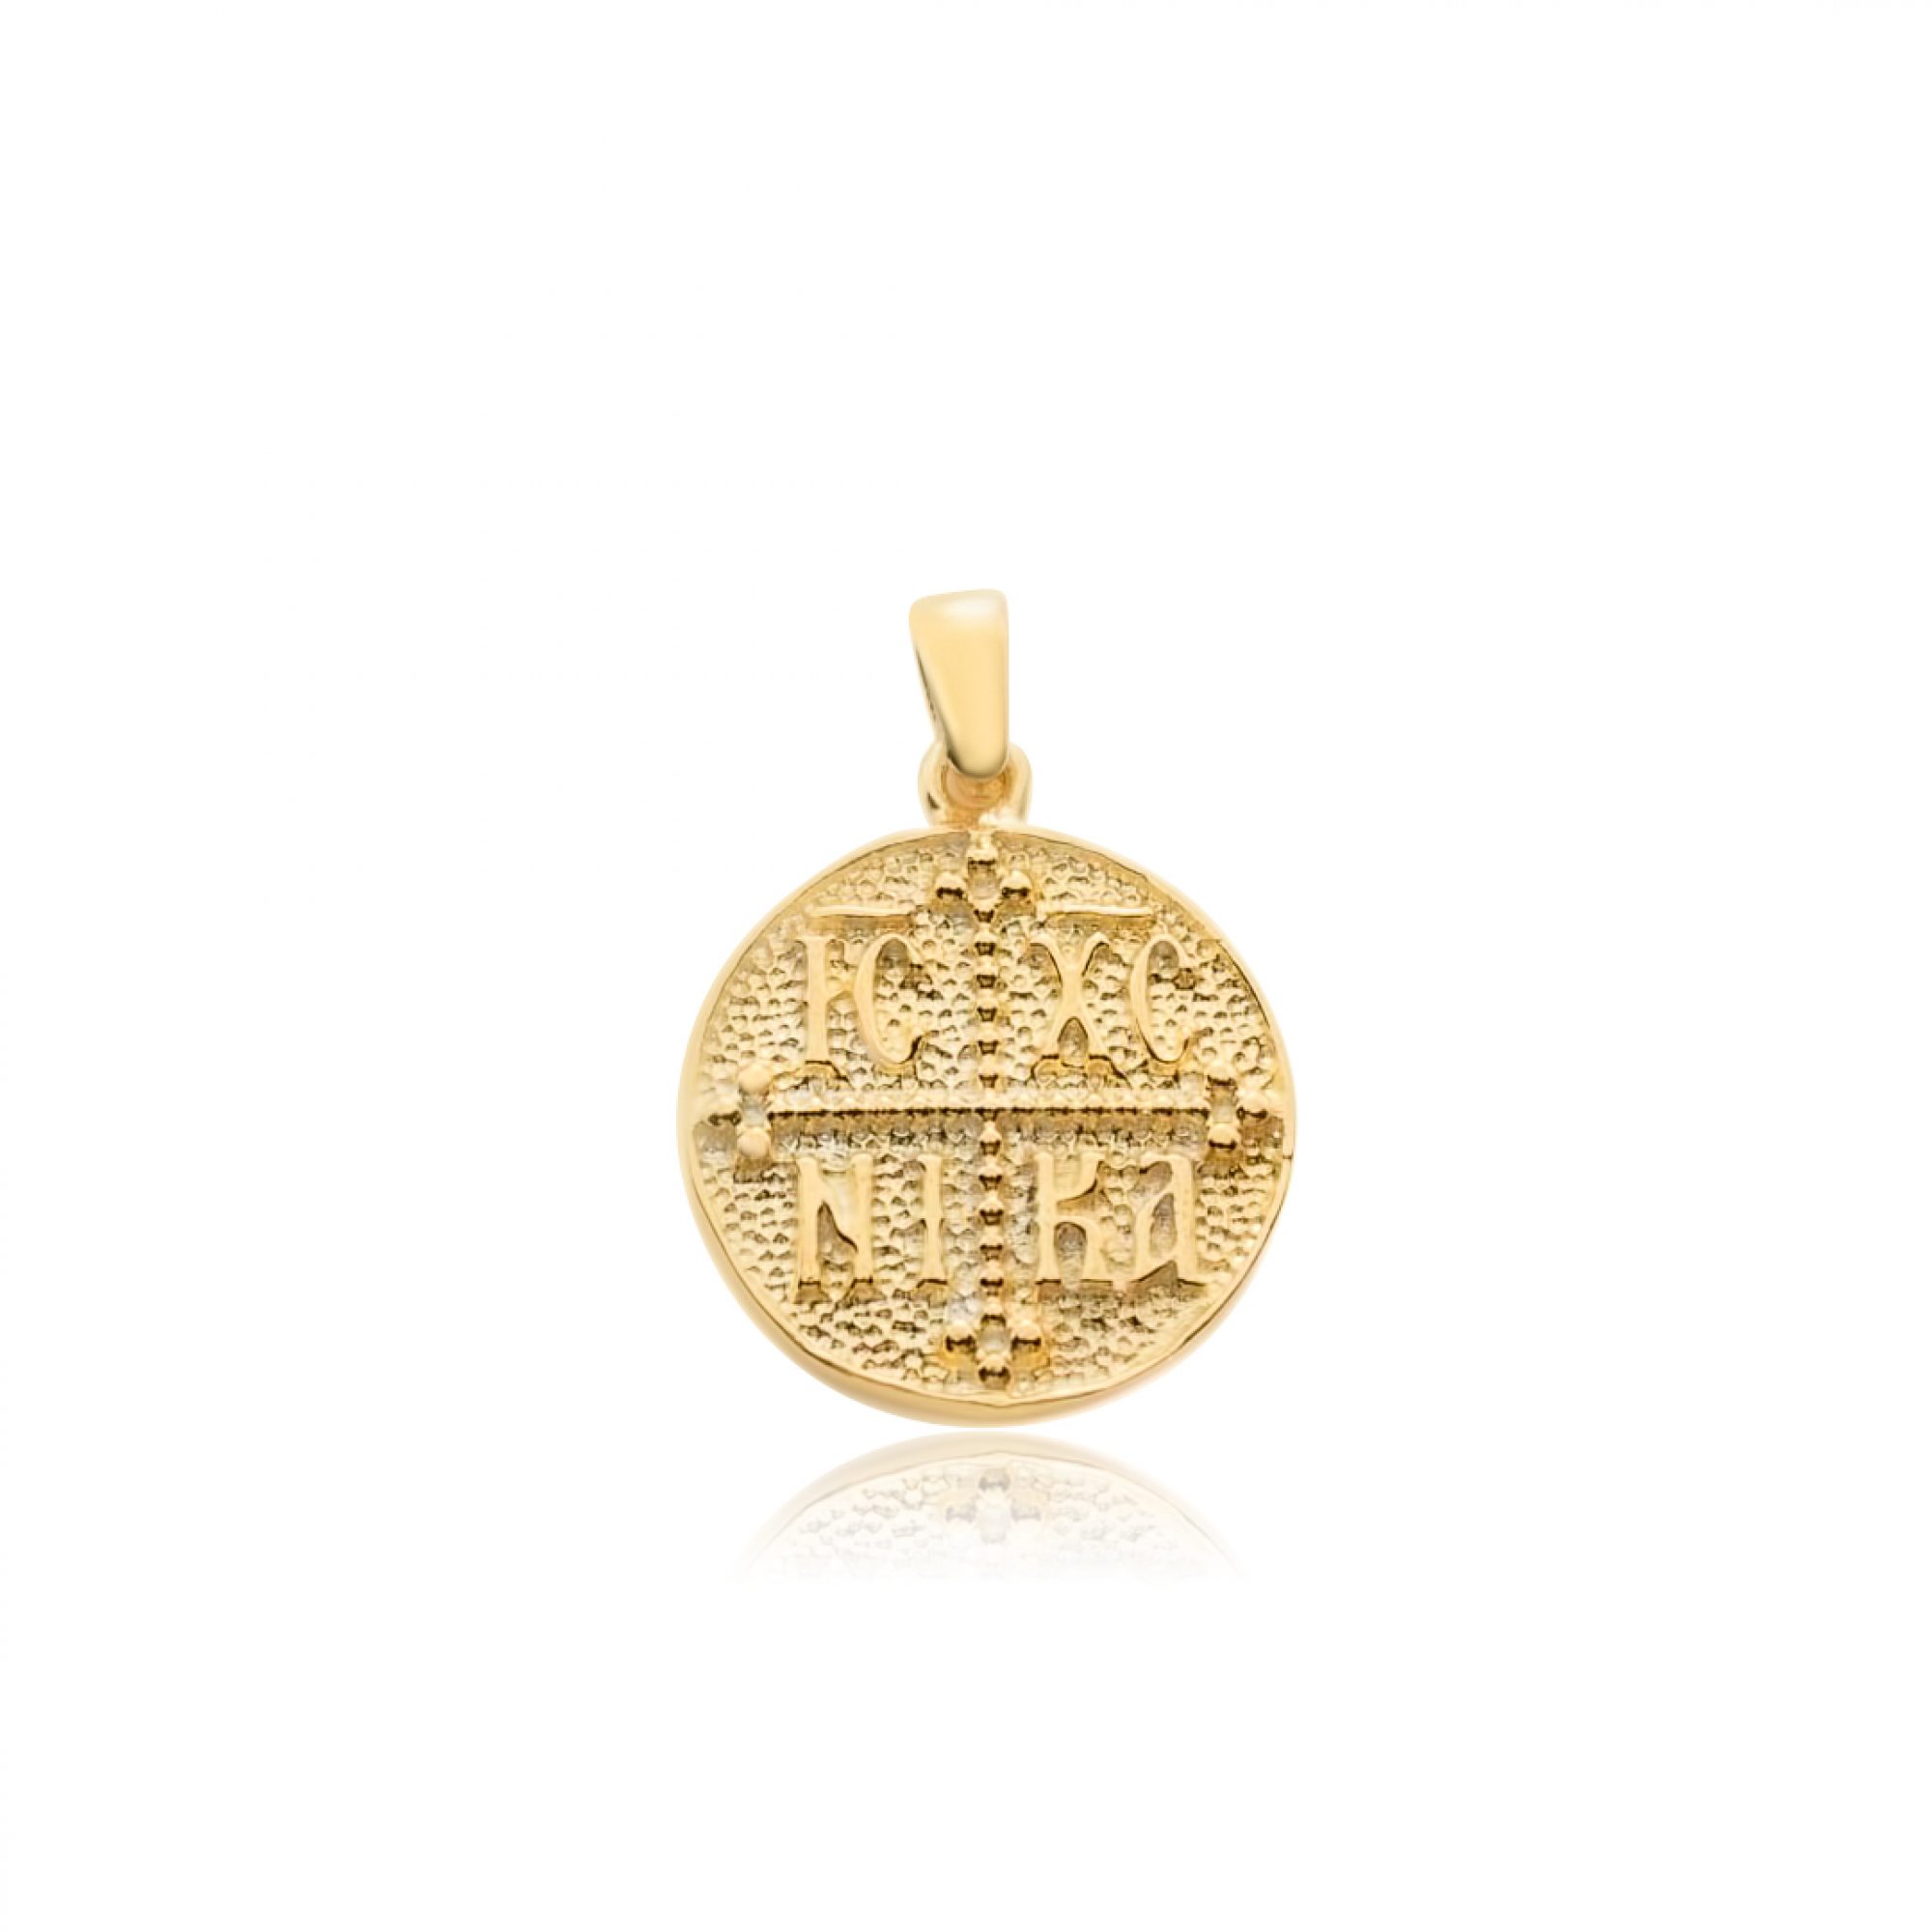 Gold plated constantine pendant